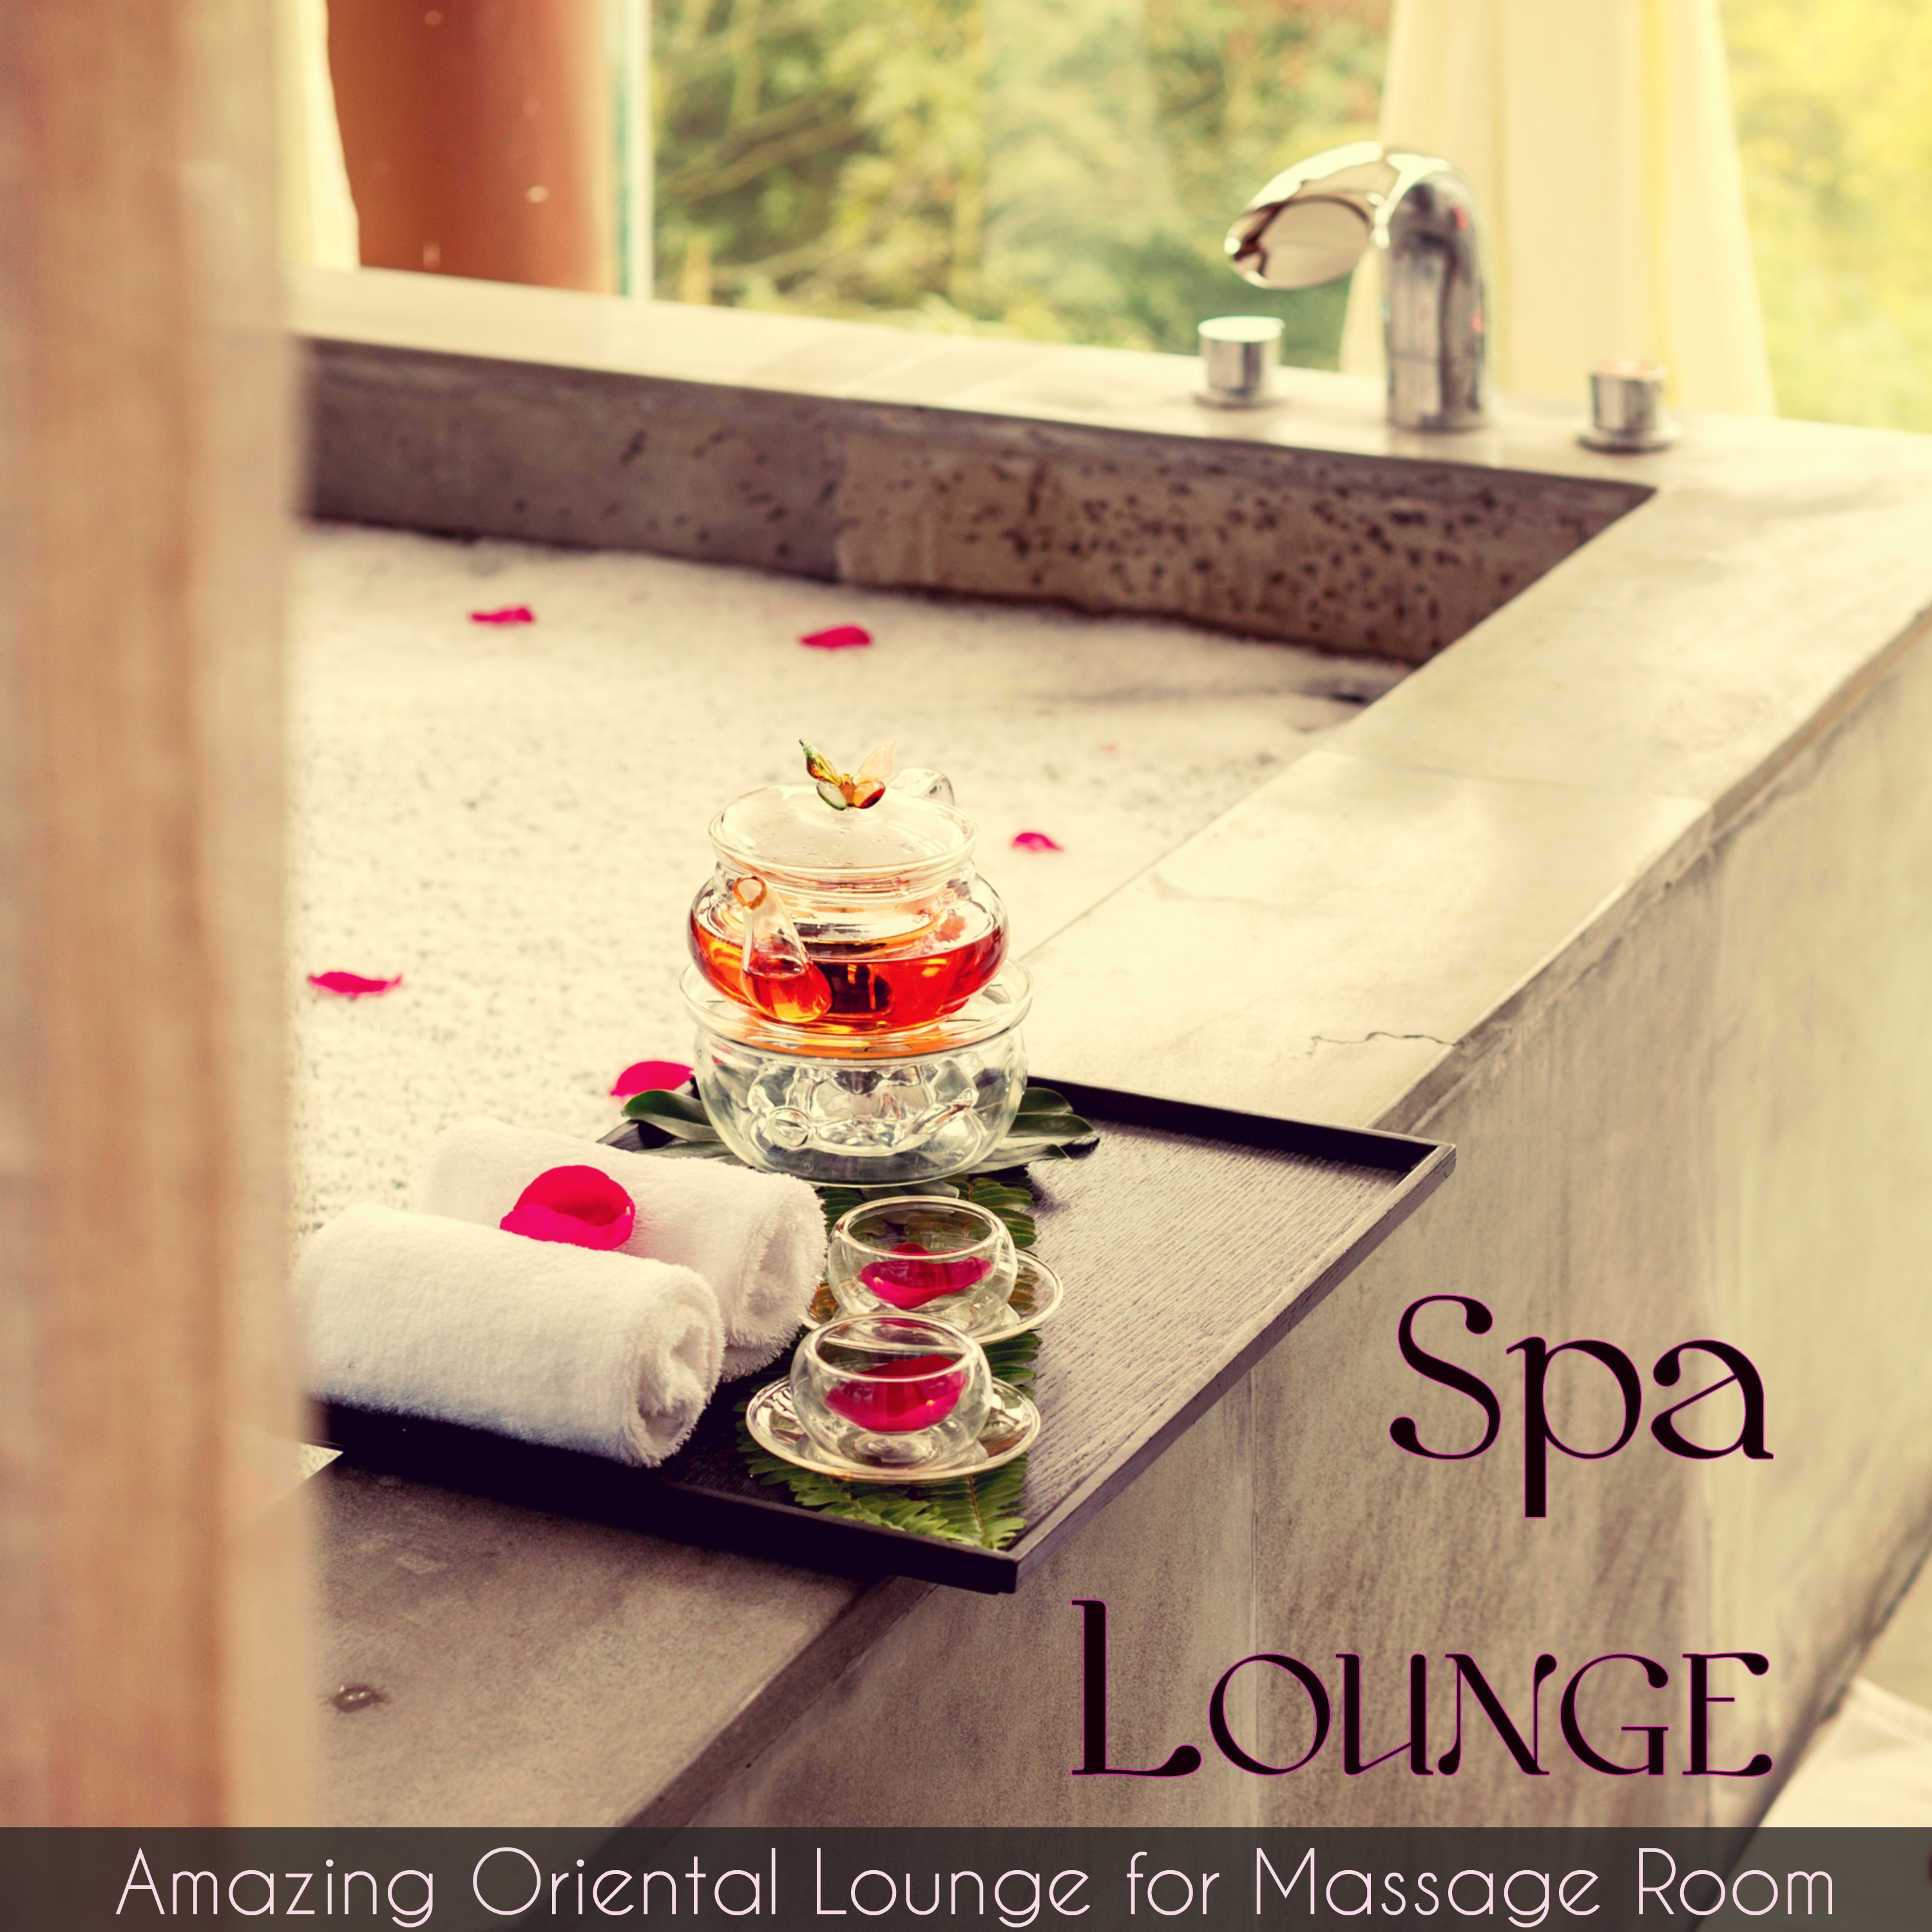 Spa Lounge – Amazing Oriental Lounge for Massage Room